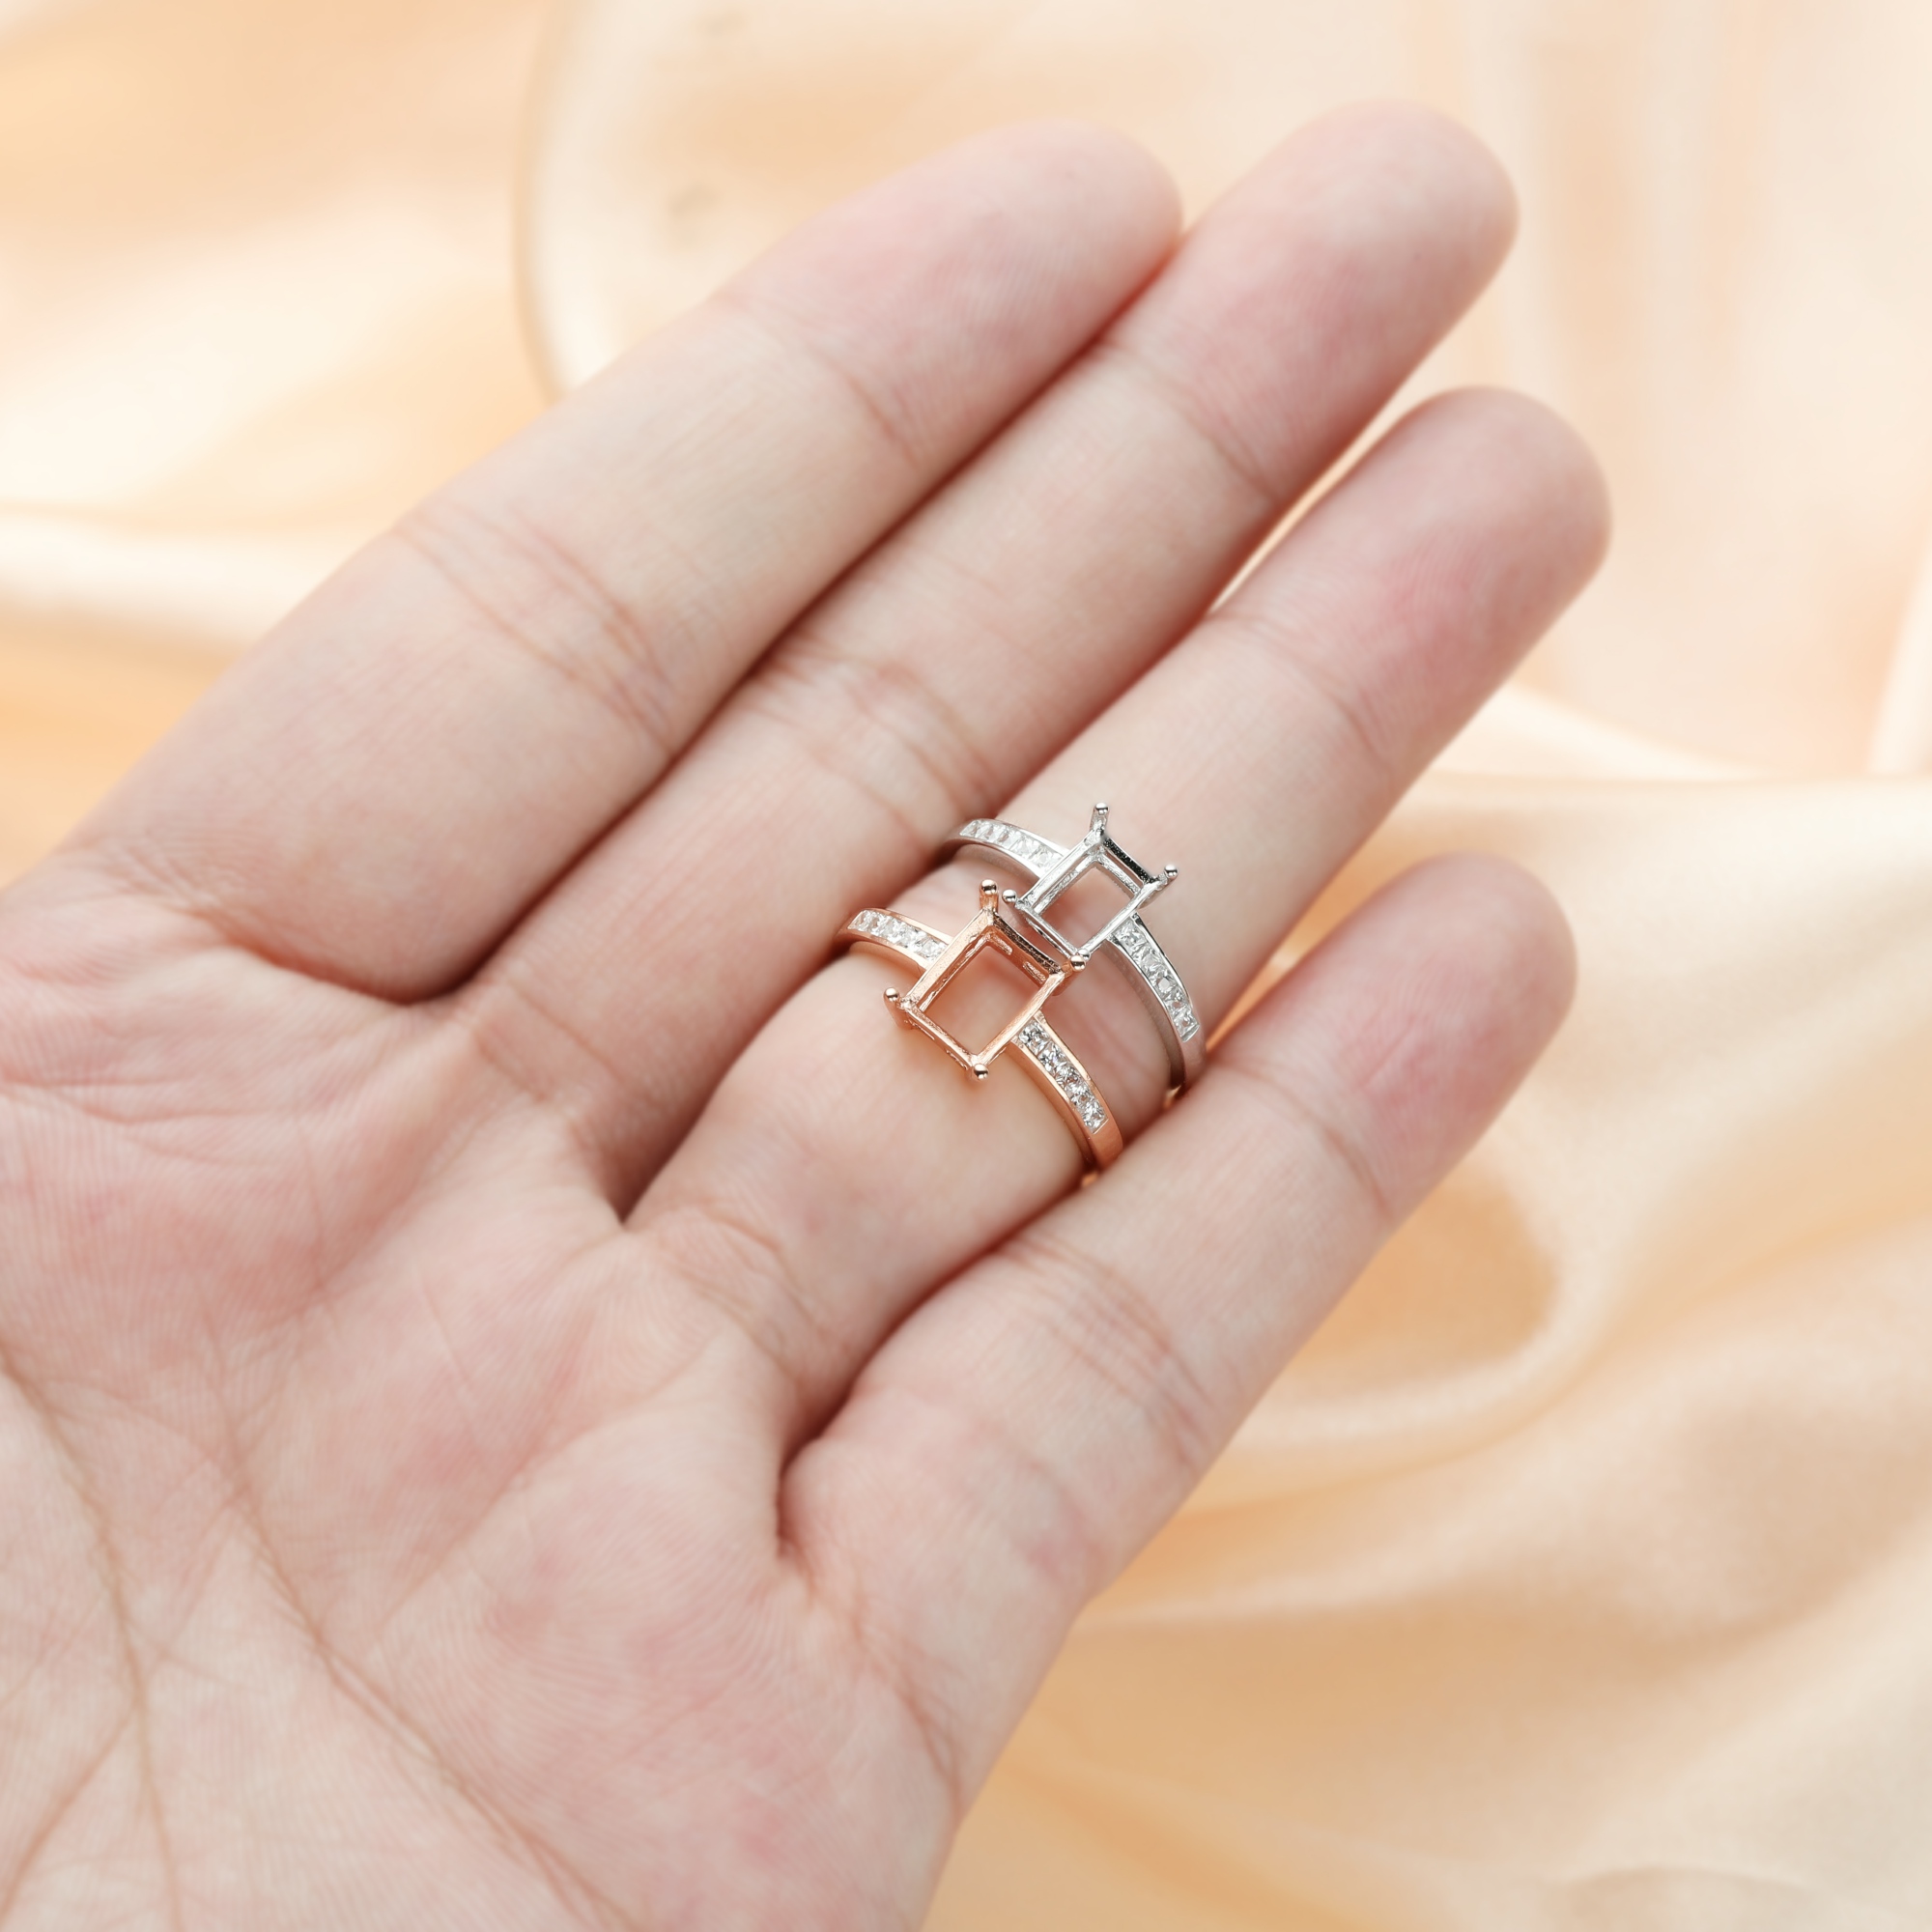 1Pcs Multiple Sizes Rectangle Rose Gold Silver Tiny Gems Cz Stone Prong Bezel Solid 925 Sterling Silver Adjustable Ring Settings 1294132 - Click Image to Close